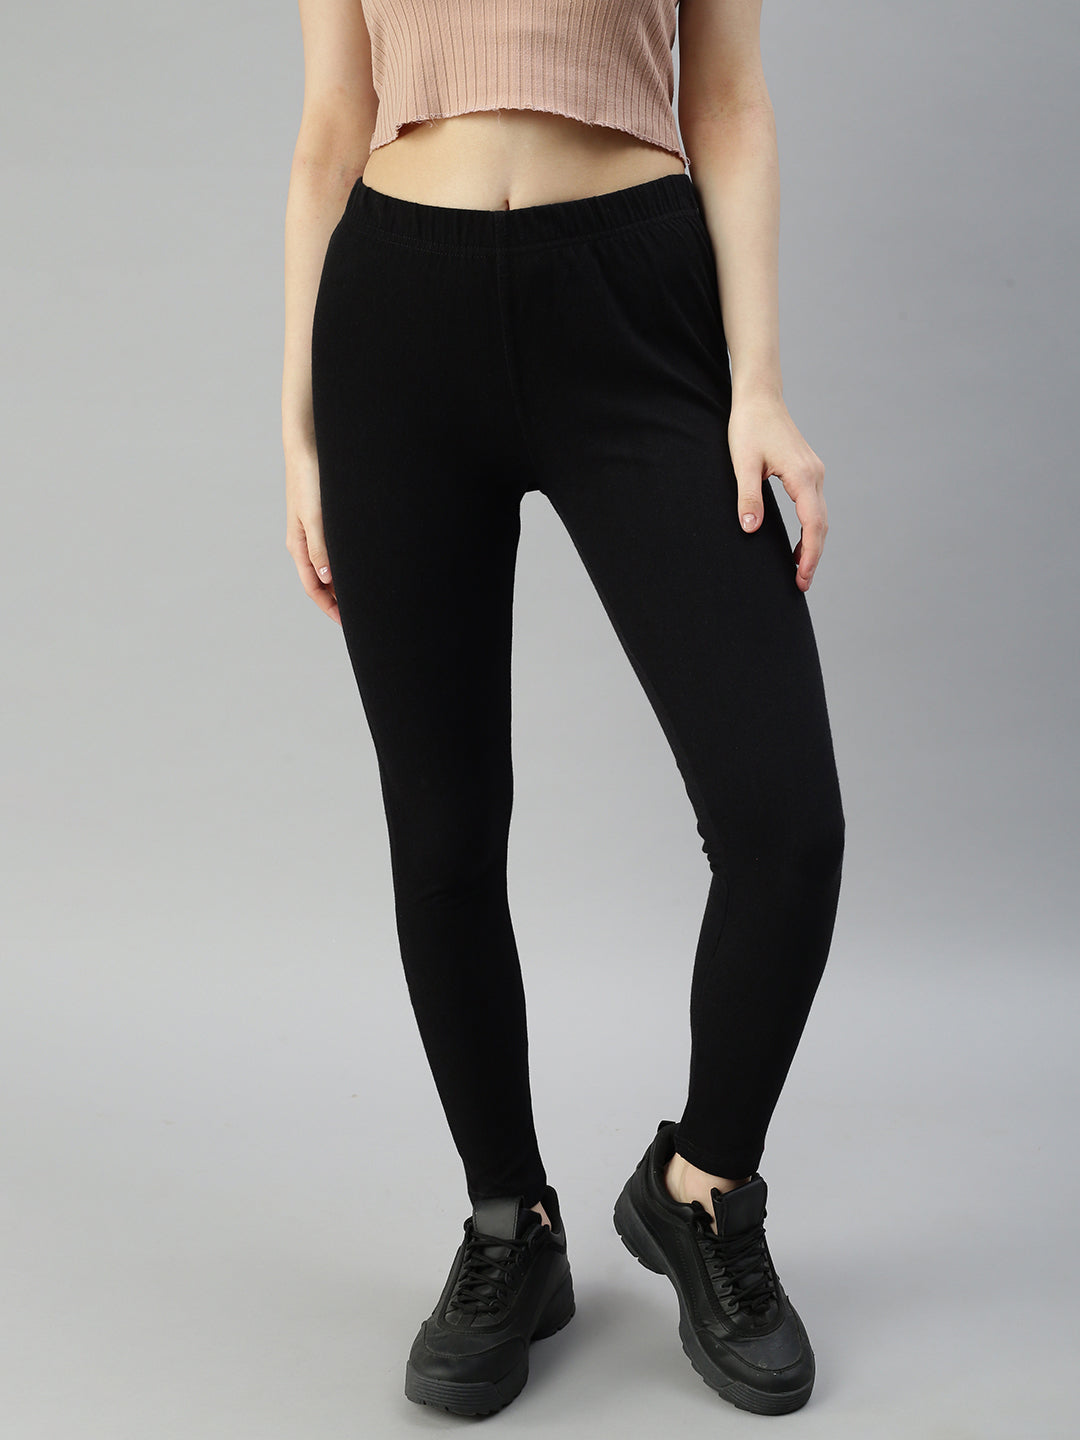 Leggings and Jeggings for Girls, Explore our New Arrivals